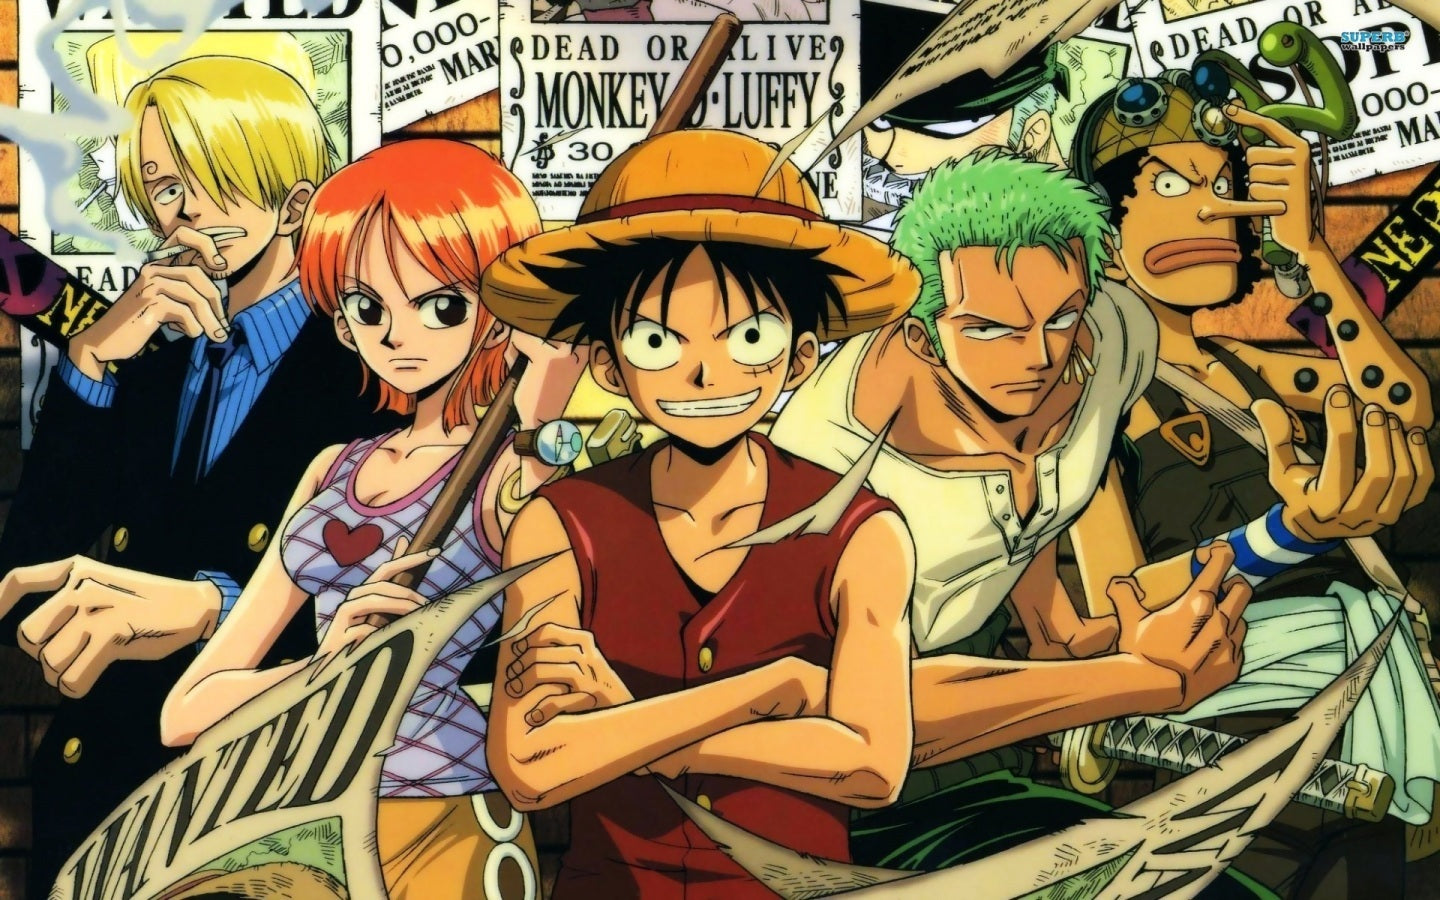 ONE PIECE AND OTHER ANIME INDEFINITELY DELAYED AFTER TOEI ANIMATION GOT HACKED